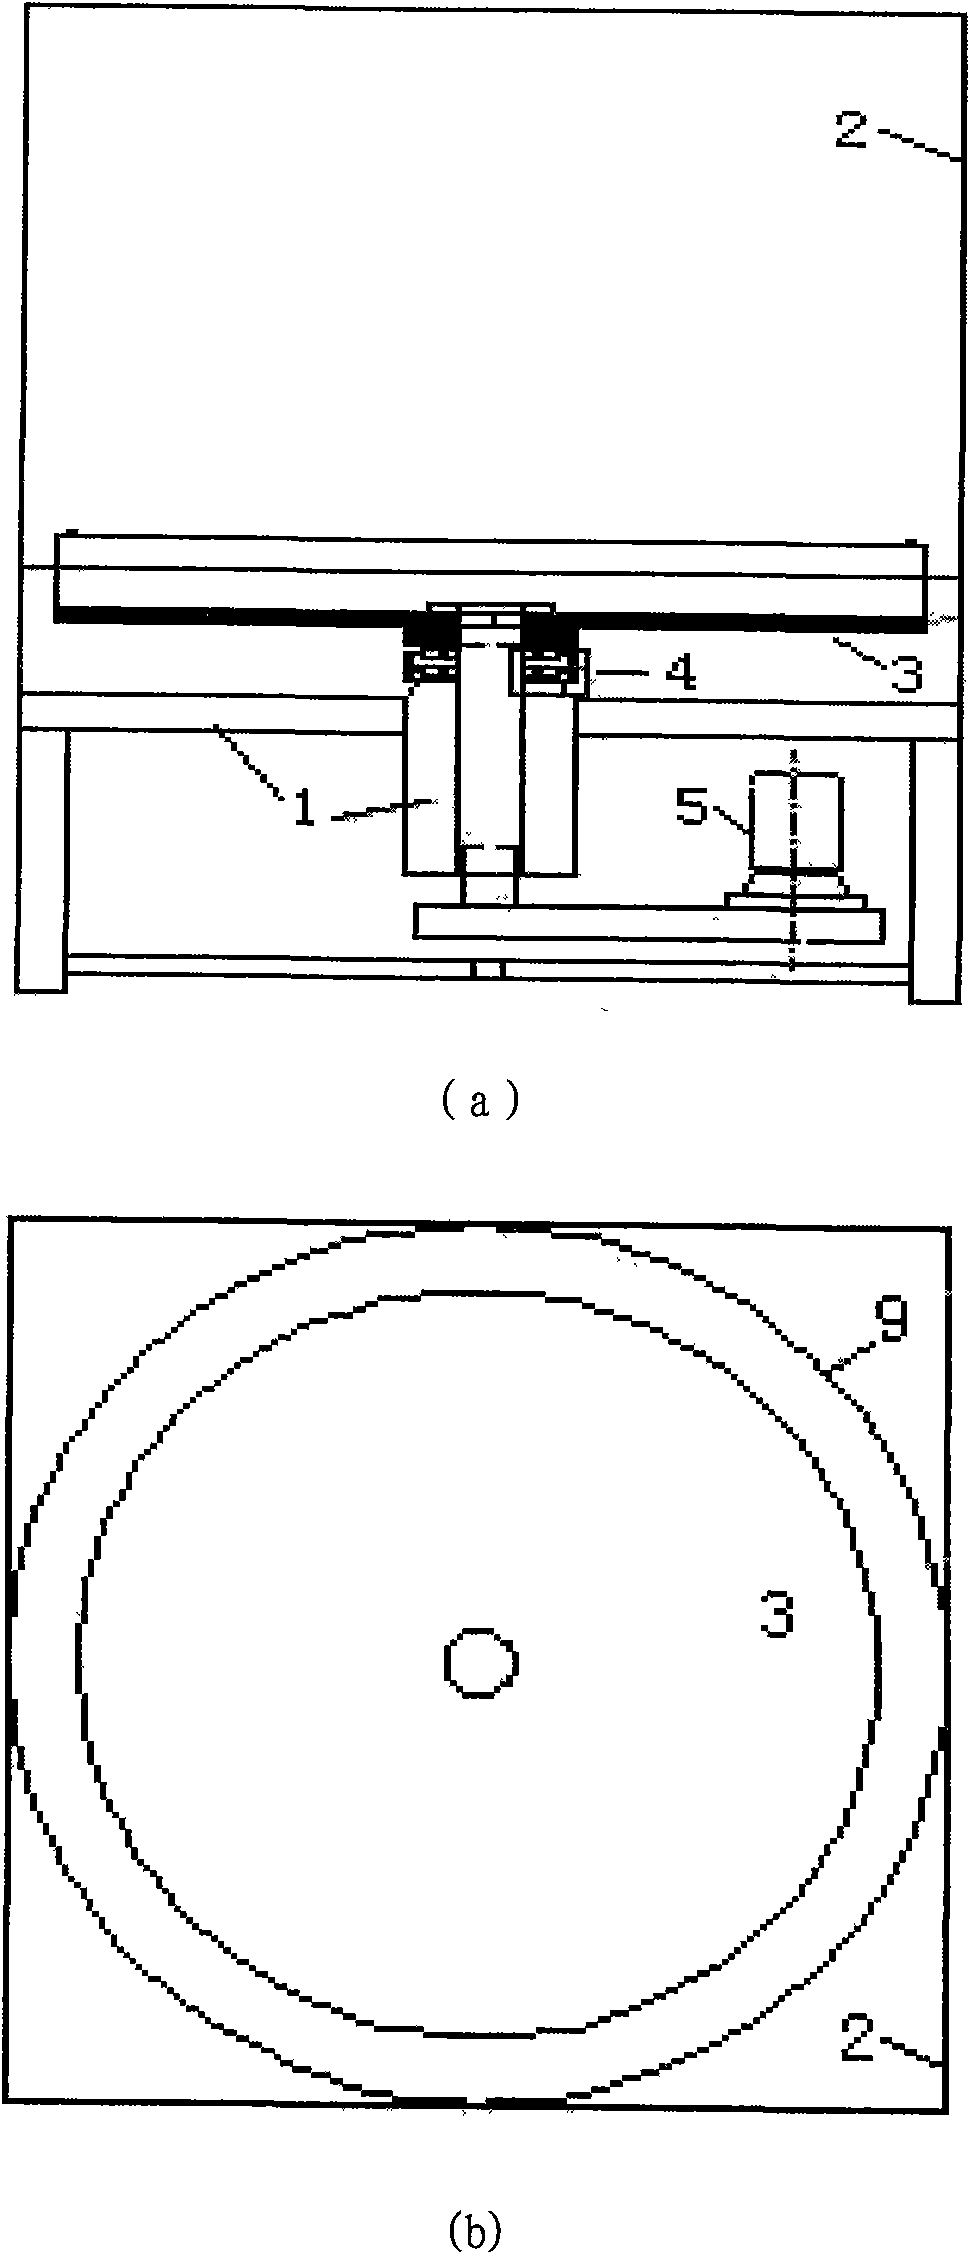 Ground simulation vapour condensation test device in the state of air movement load and method